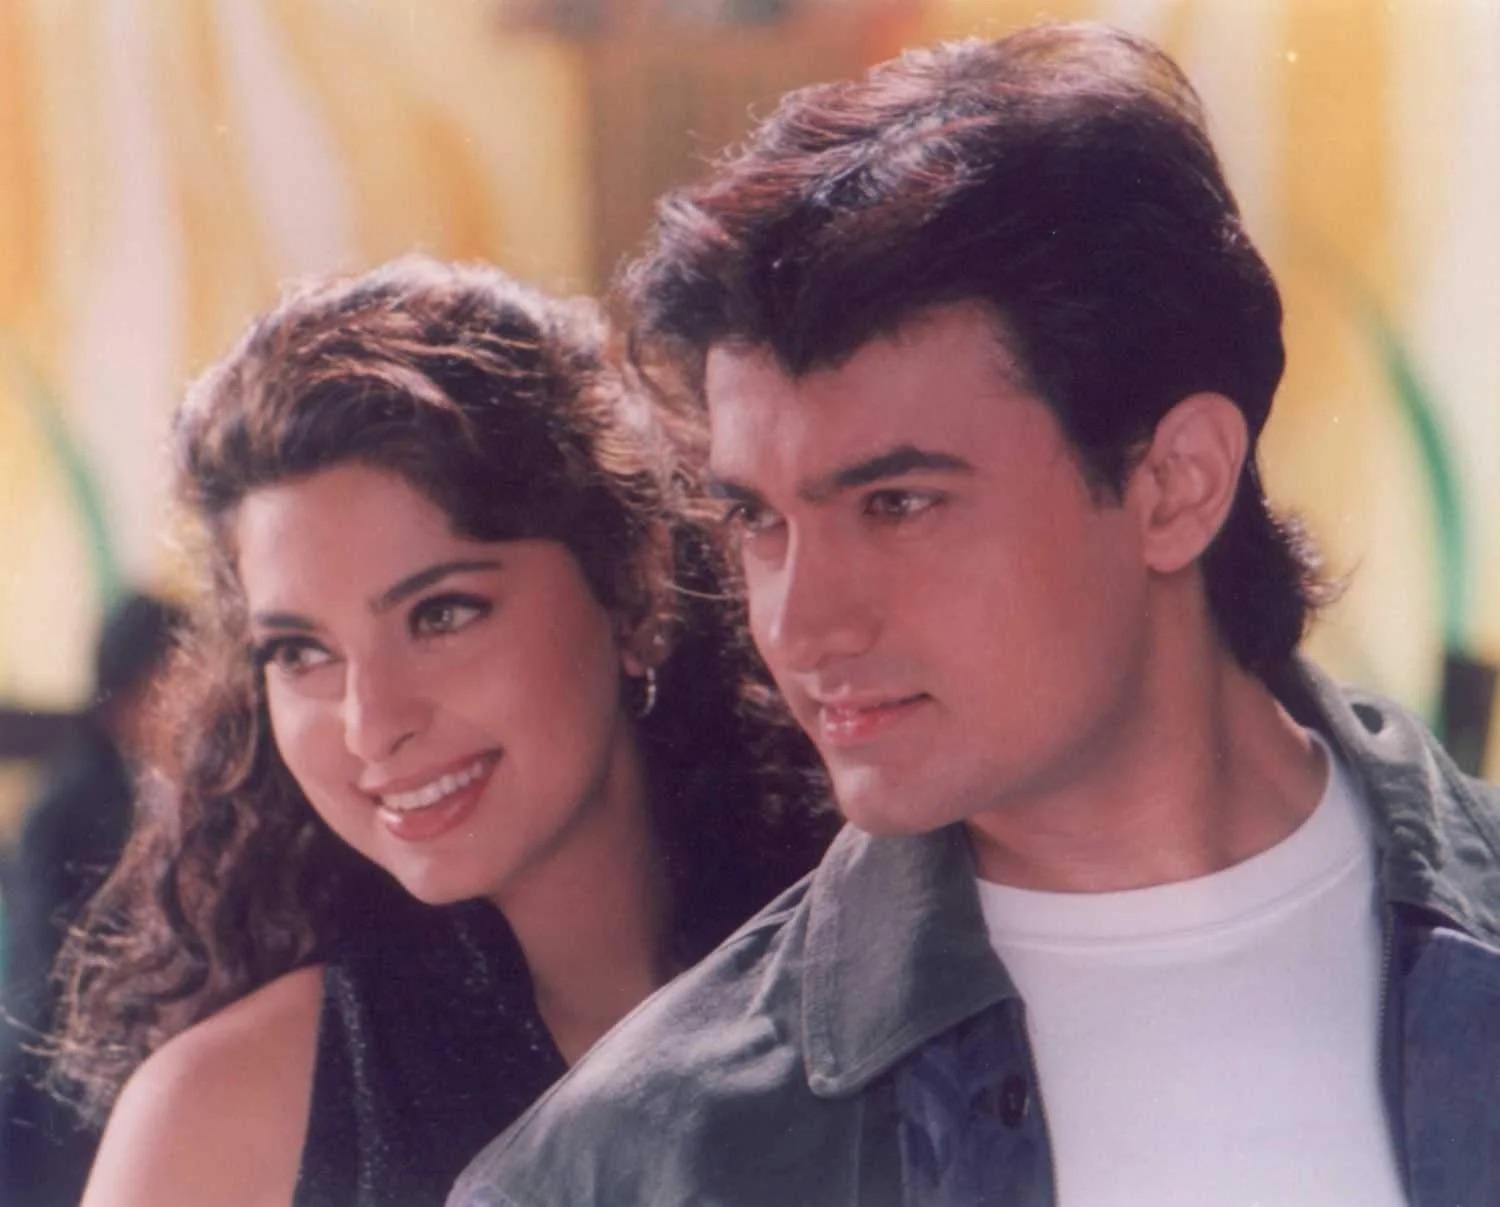 Those classics like Qayamat Se Qayamat Tak where Aamir Khan and Juhi Chawla starred together are hard to forget. They were the ultimate '90s heartthrobs, weren't they?